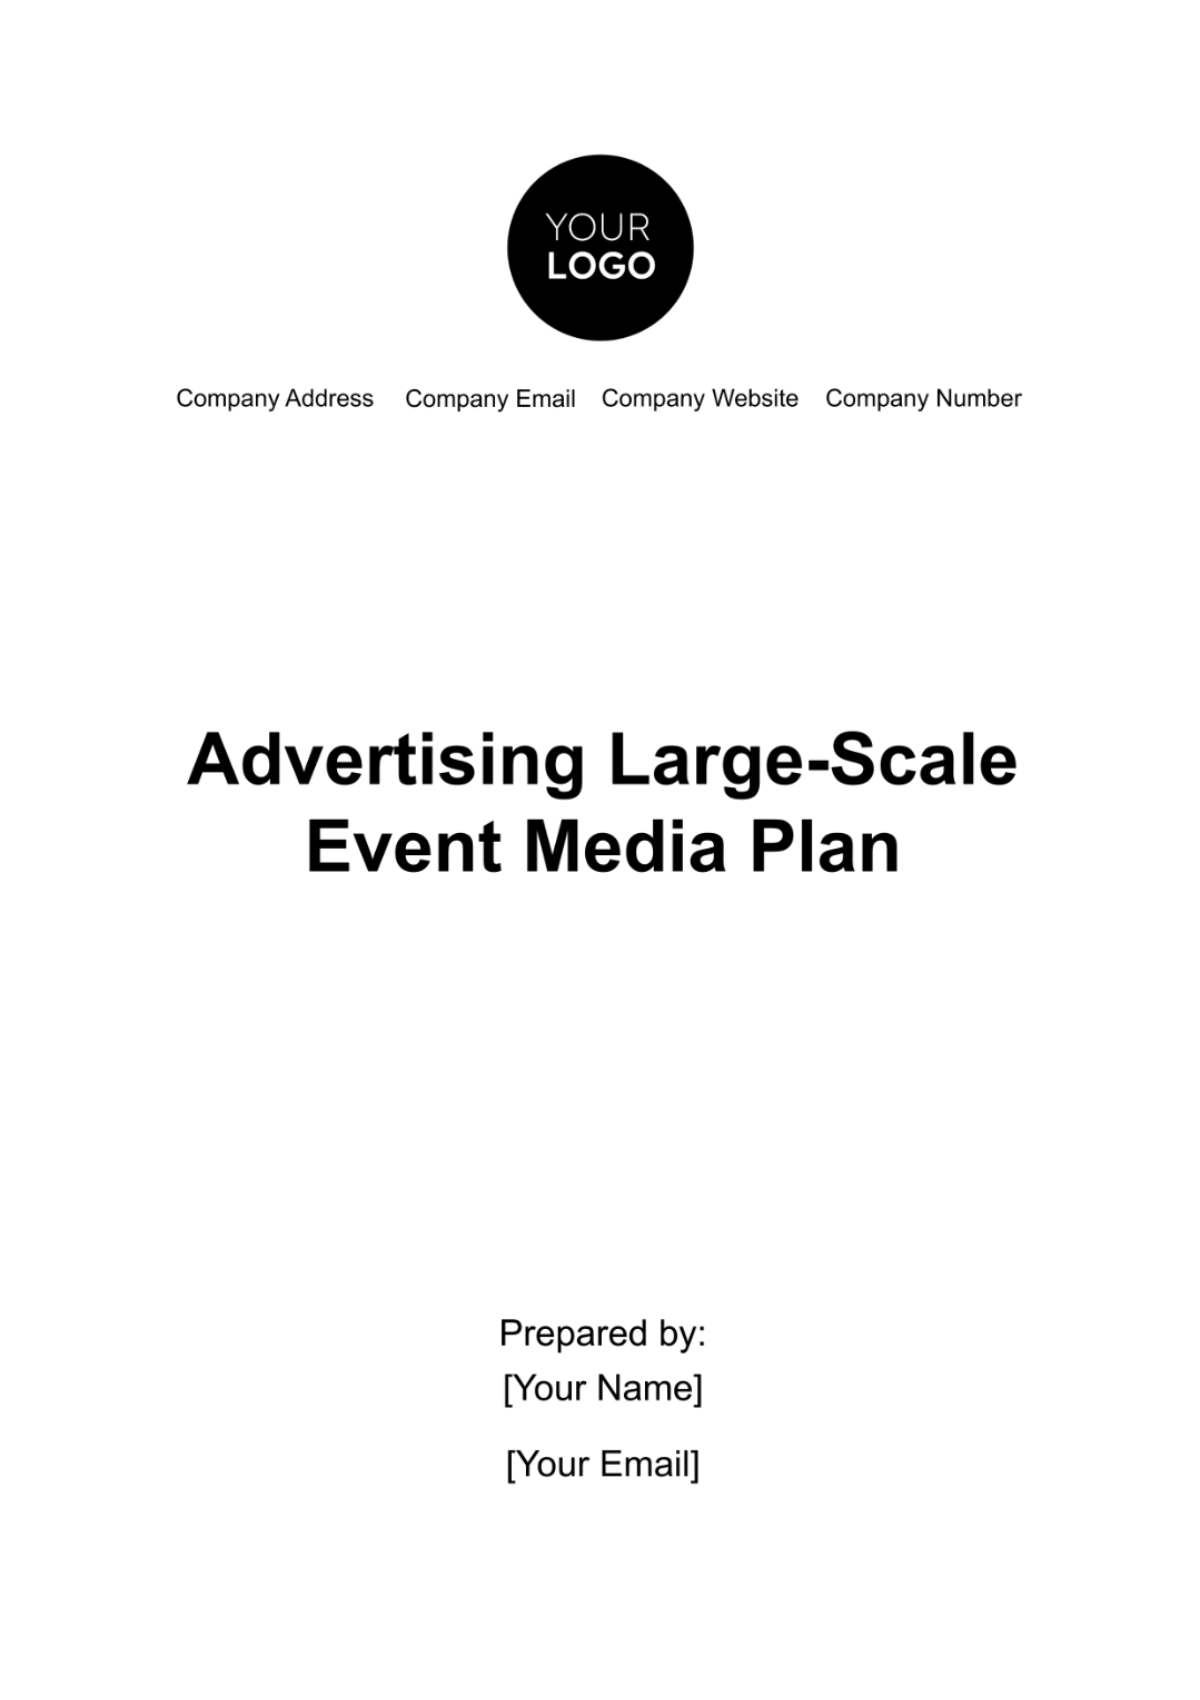 Advertising Large-Scale Event Media Plan Template